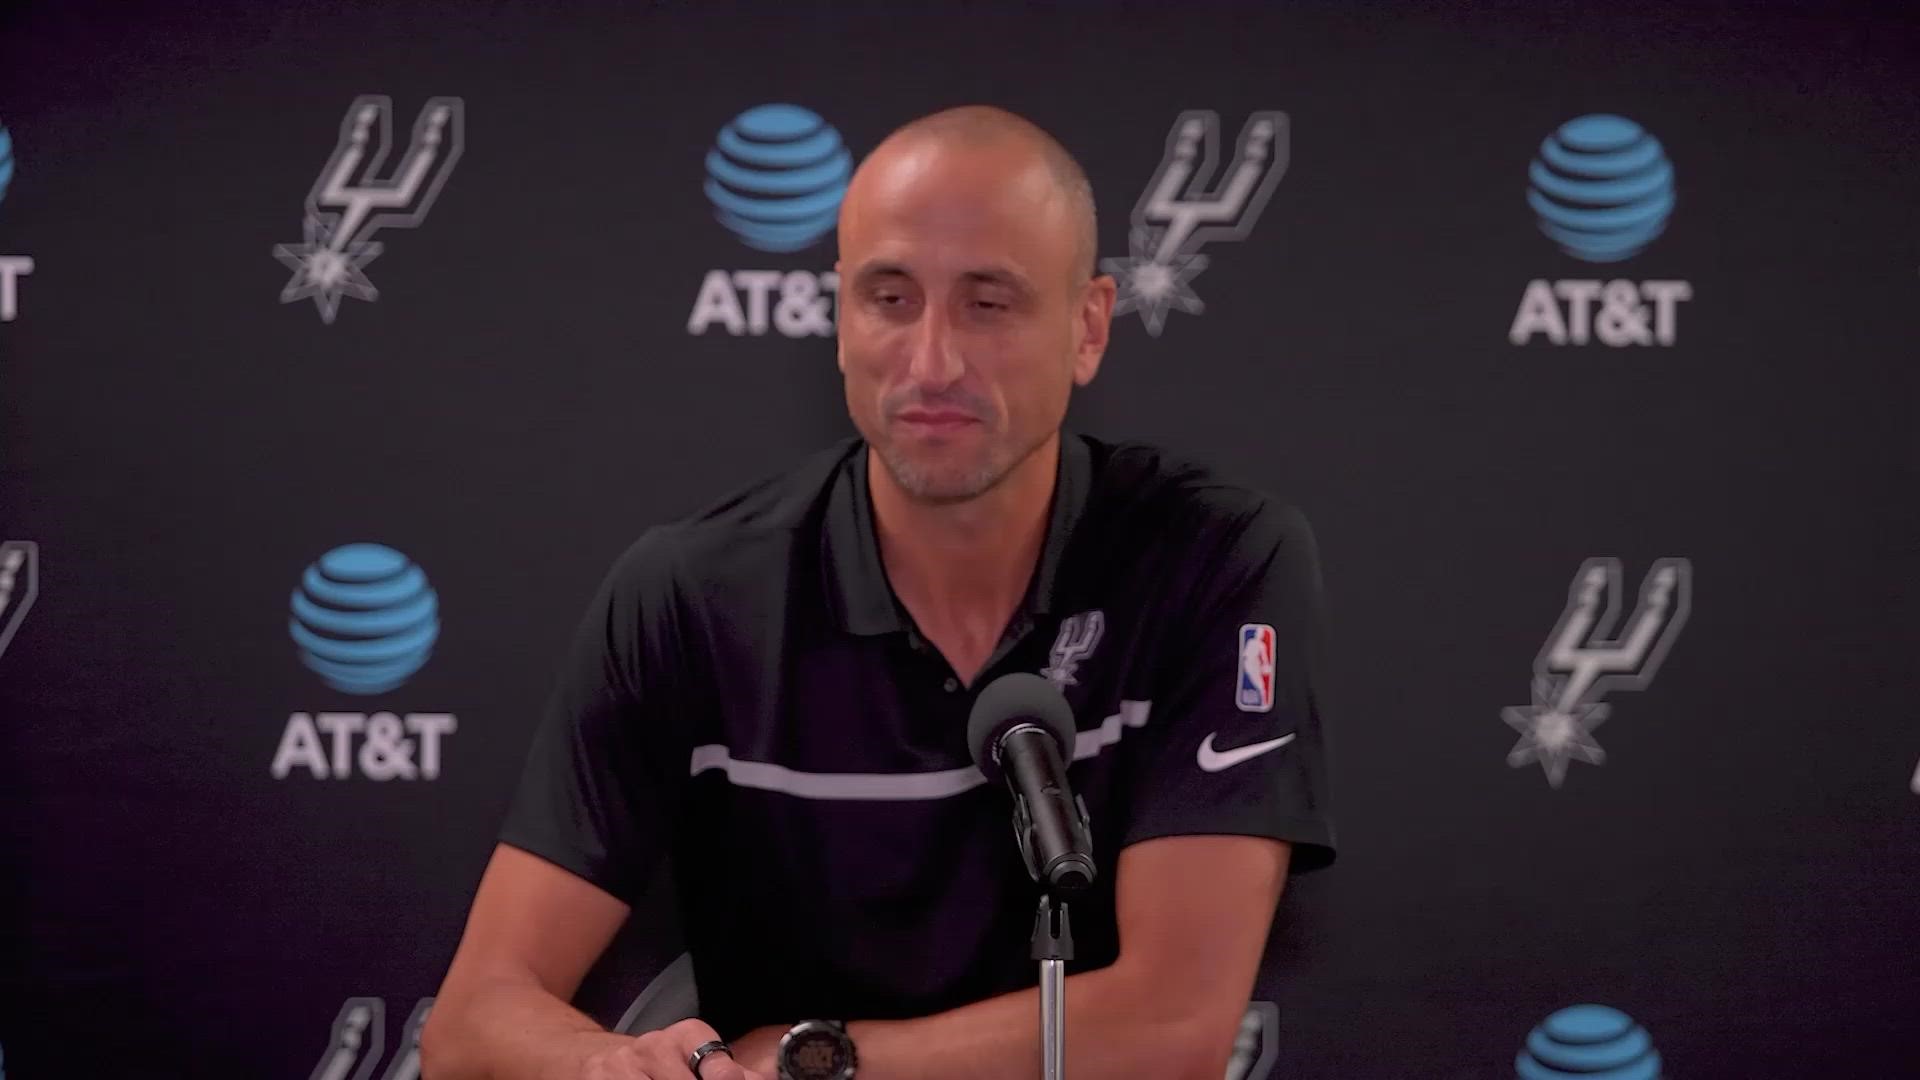 Ginobili said his journey was one in tens of millions, and reflected on his place in the history of international basketball.